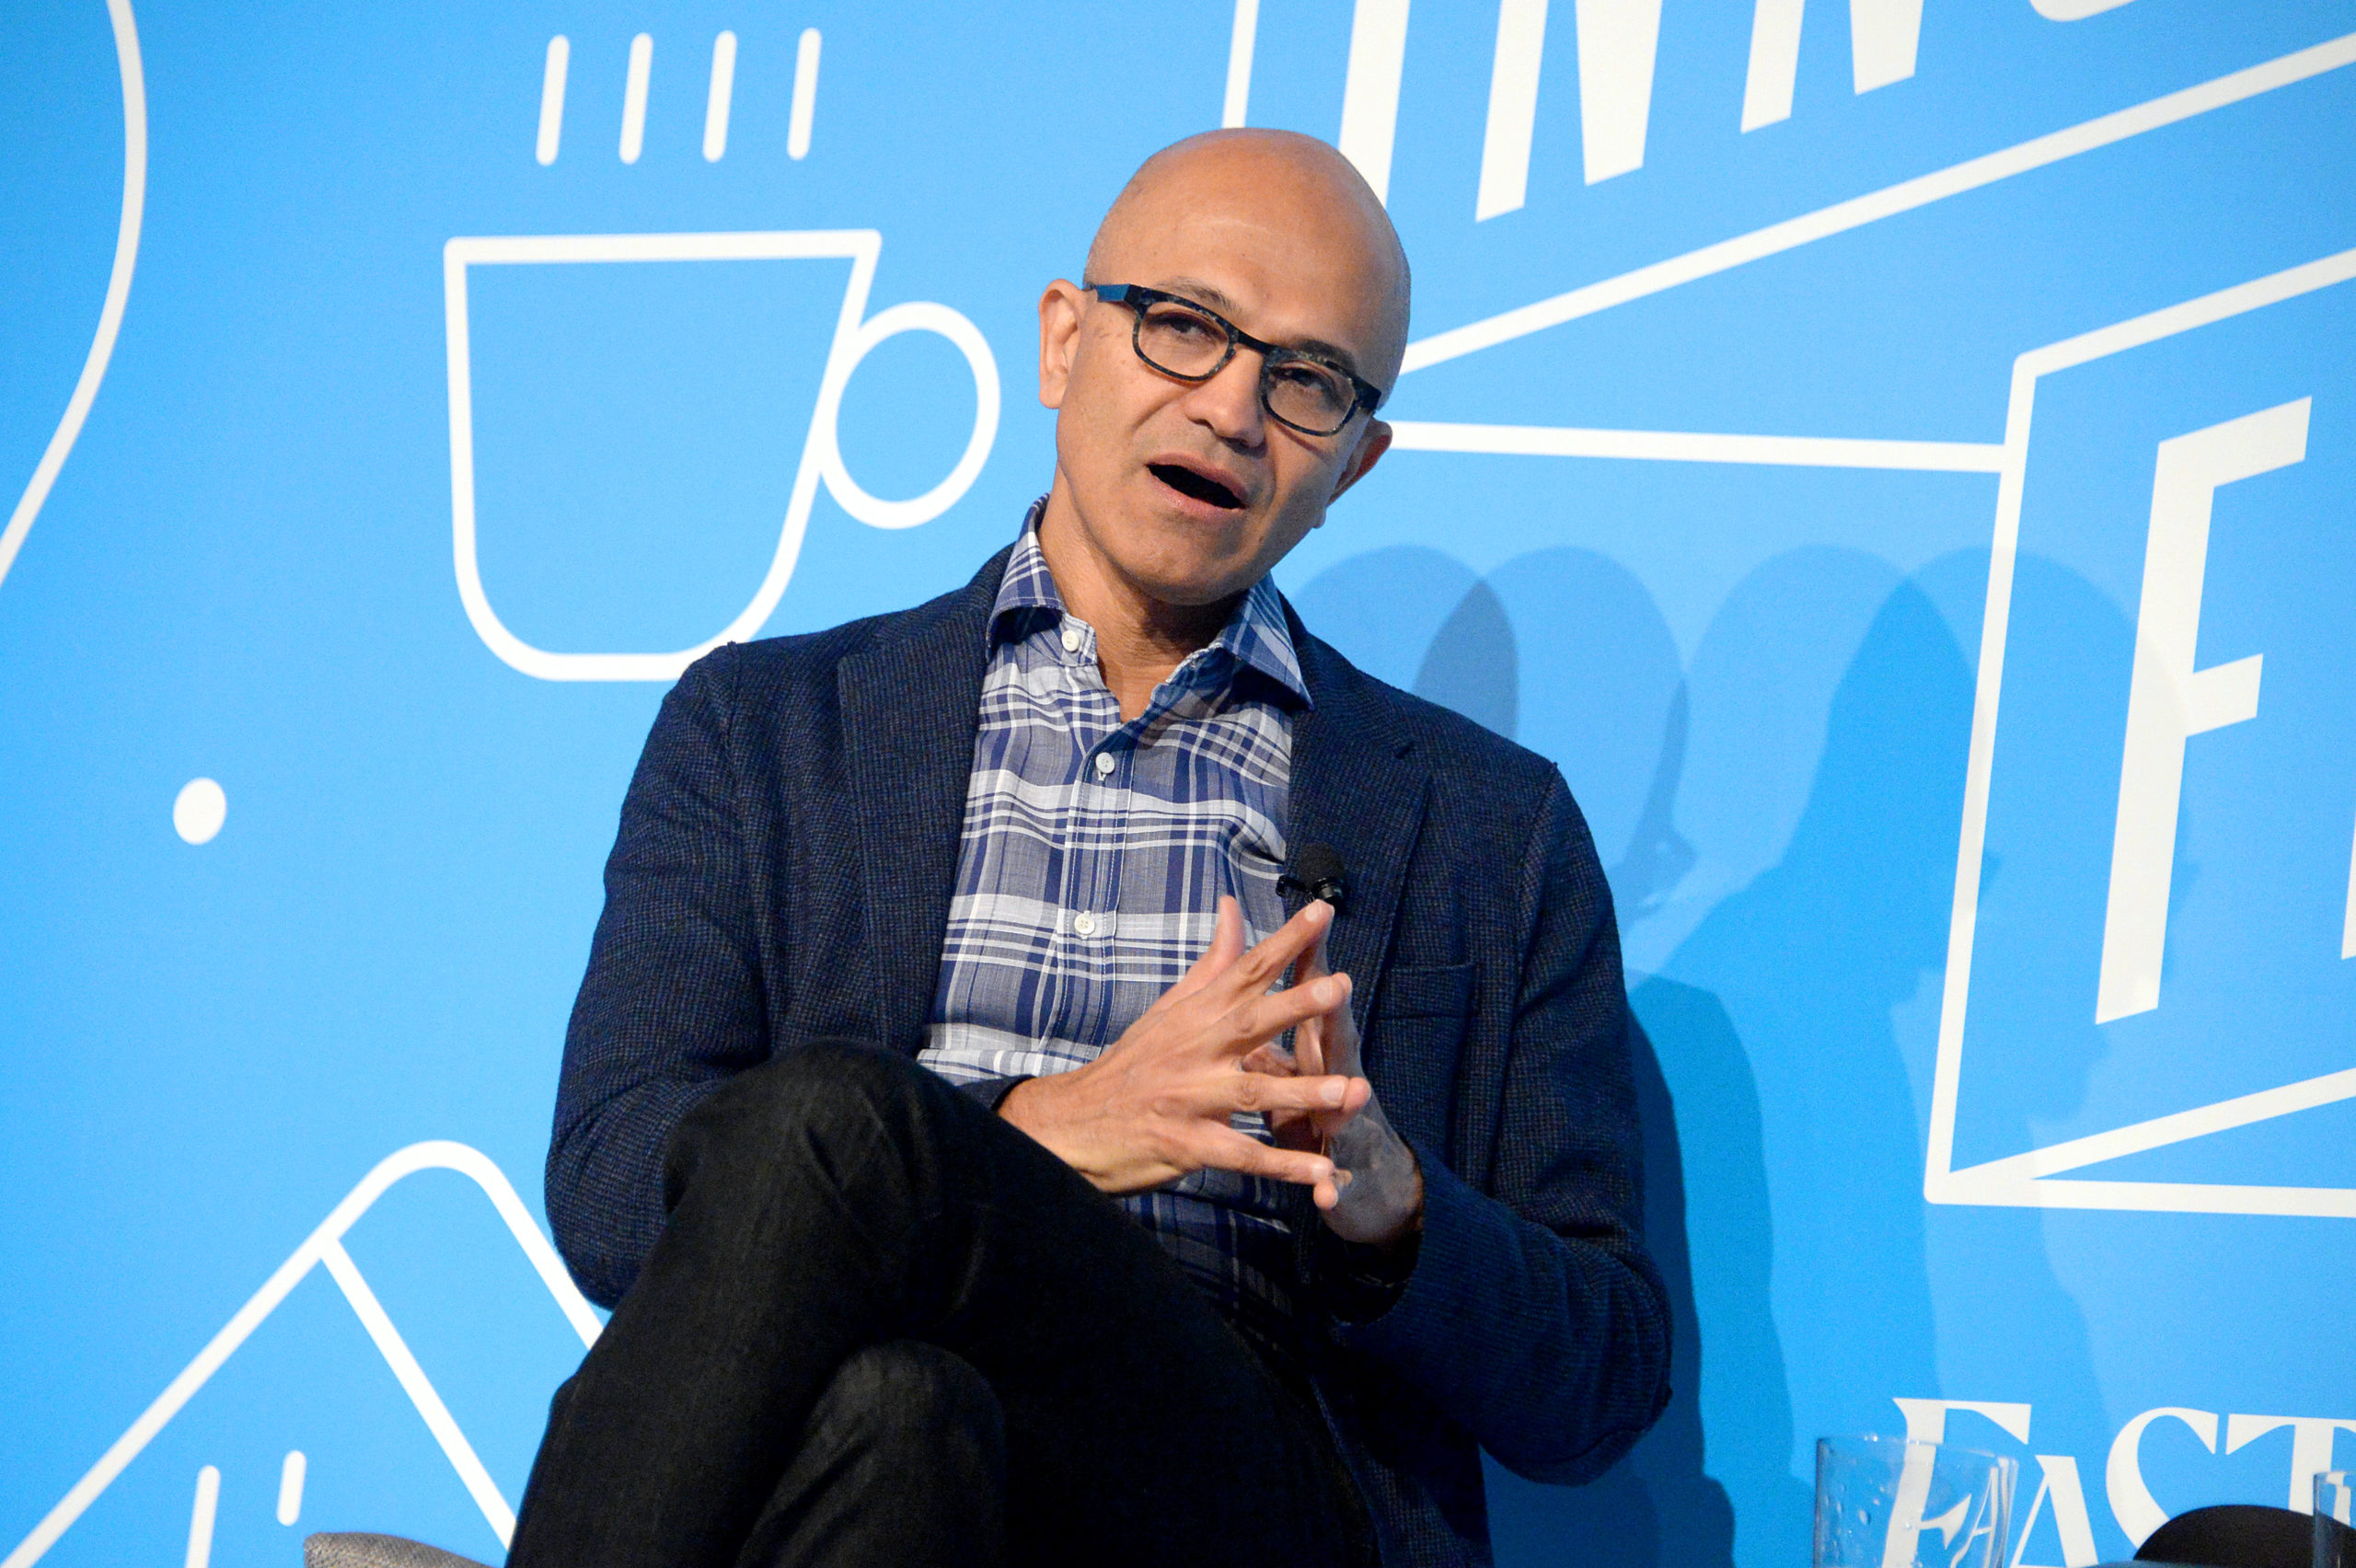 Satya Nadella speaks on stage at the "A Conversation with Microsoft's Satya Nadella" panel at the on November 07, 2019 in New York City. (Photo by Brad Barket/Getty Images for Fast Company)